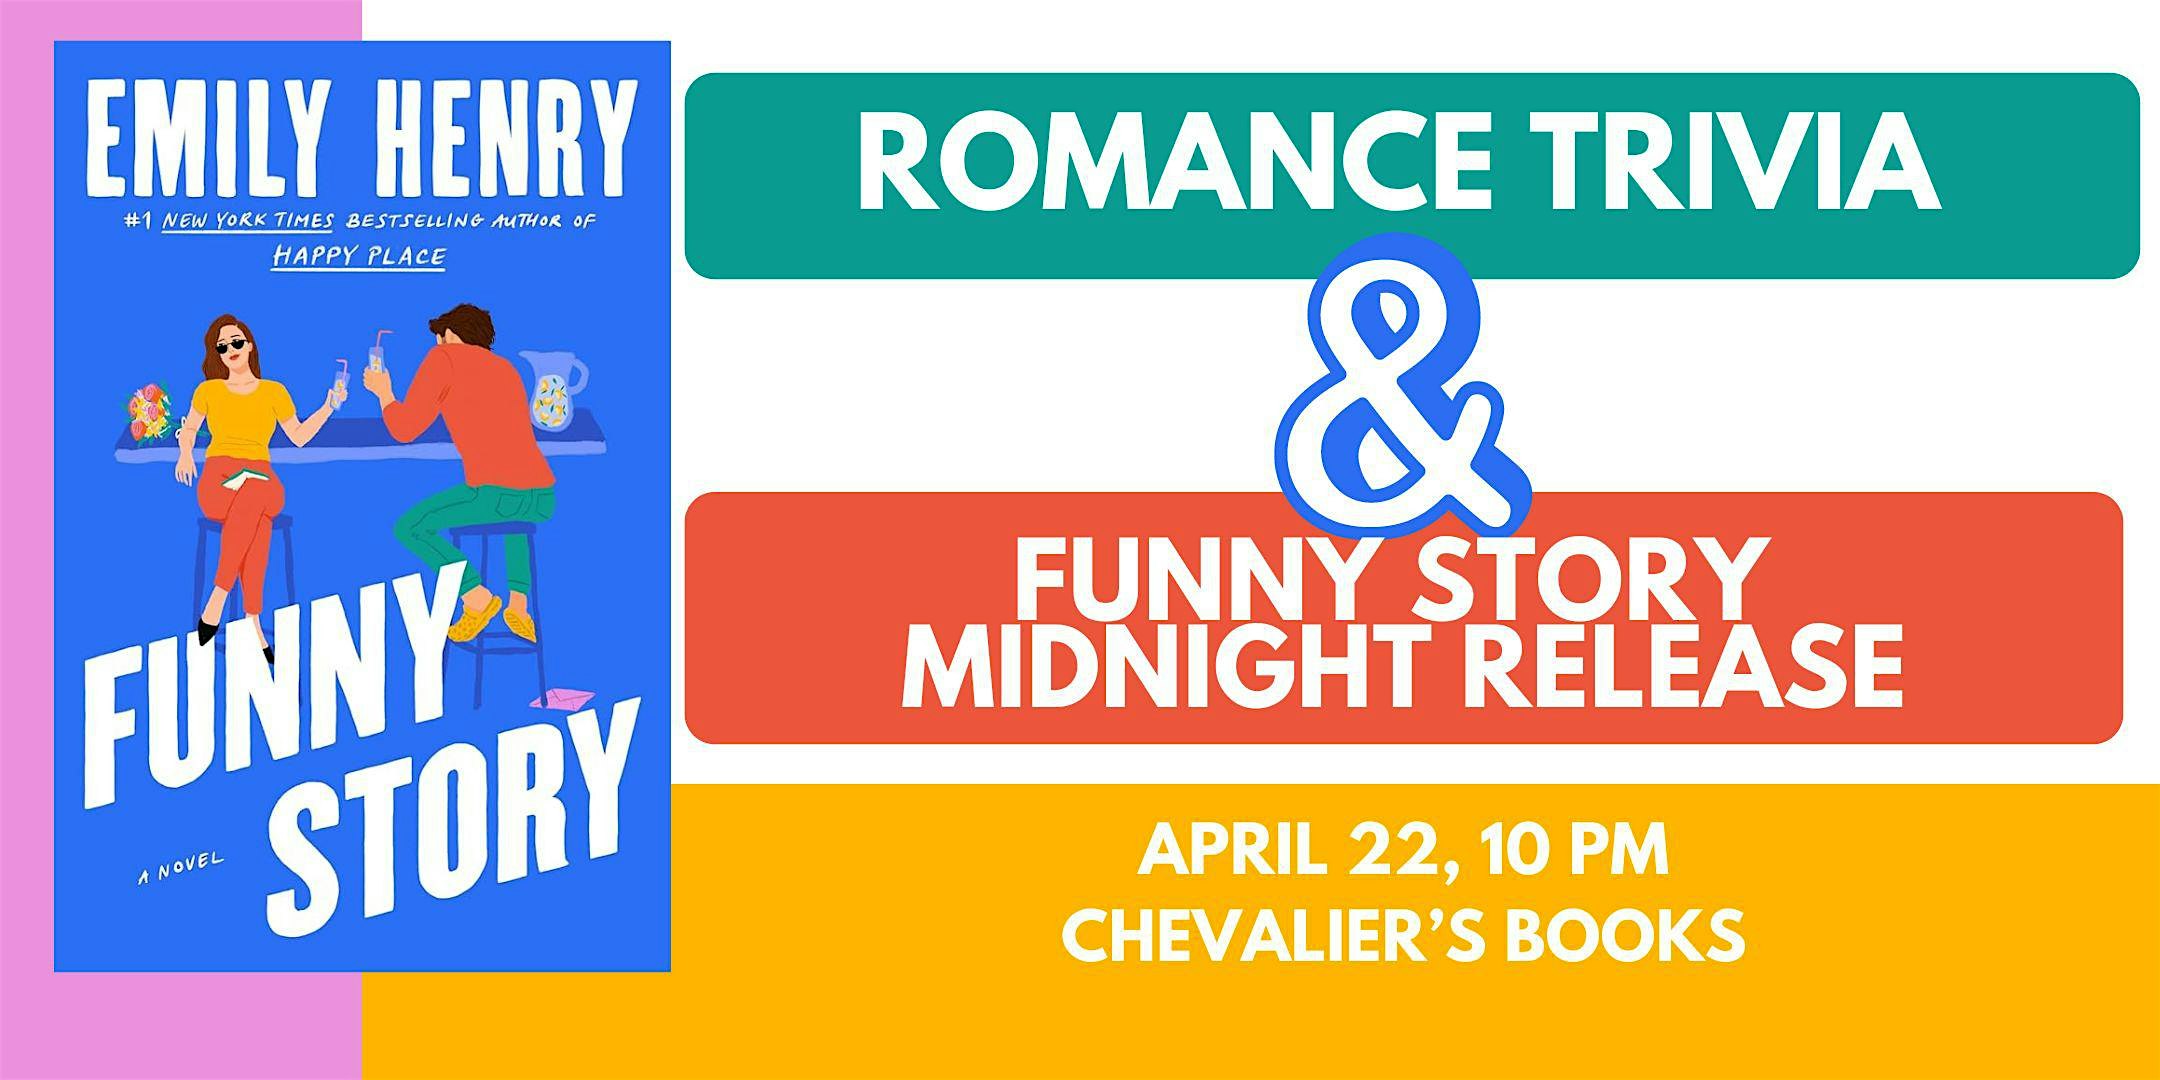 Romance Trivia Night & Funny Story Midnight Release Party